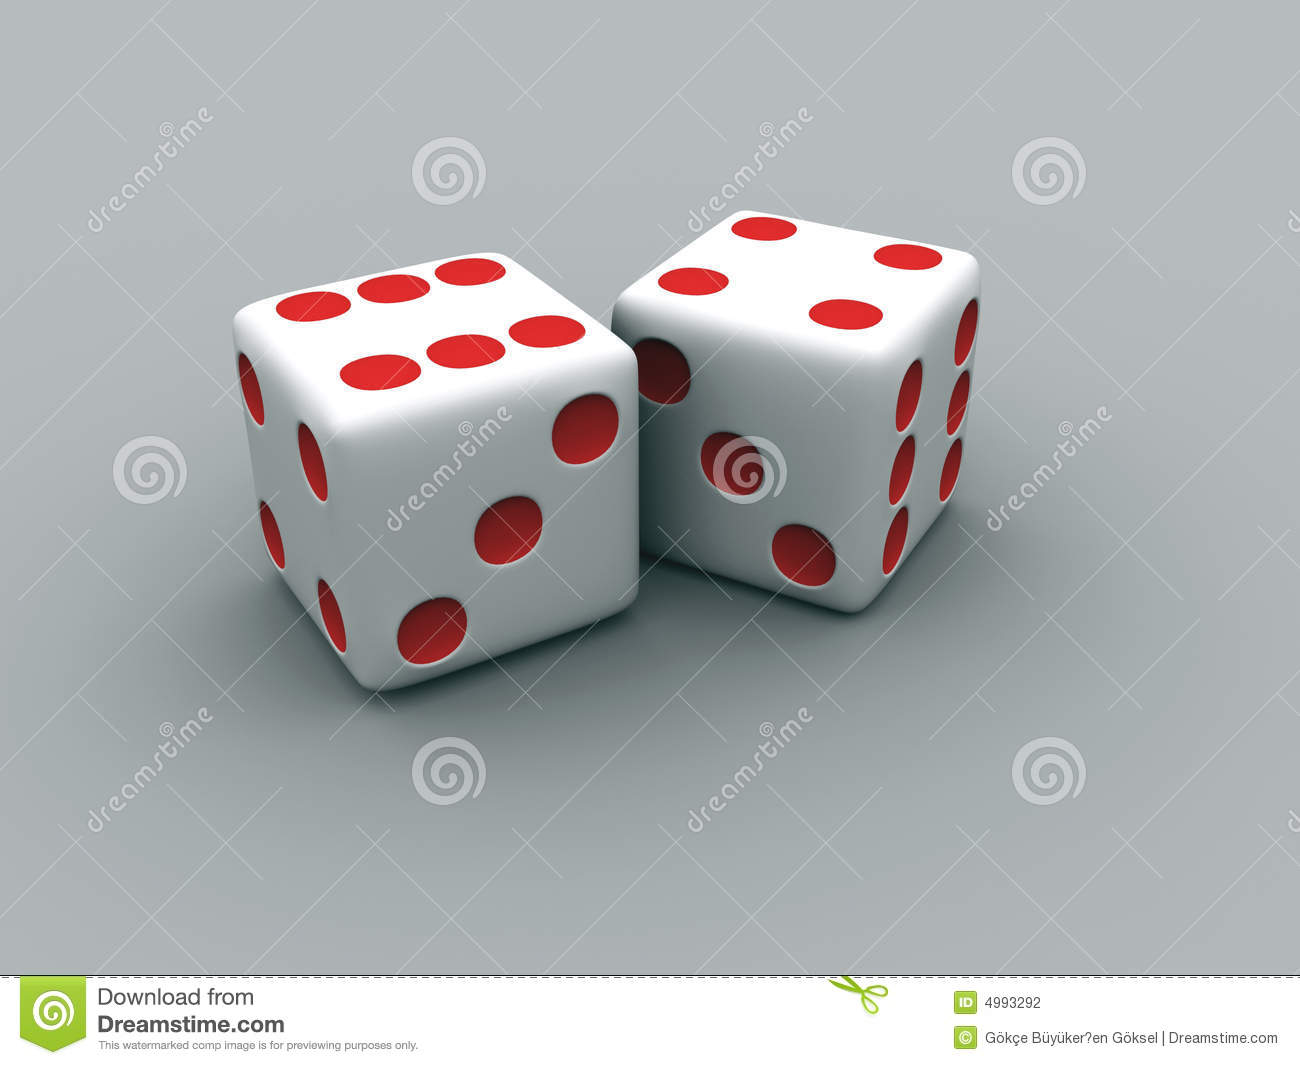 Pair Of Dices With Red Dots